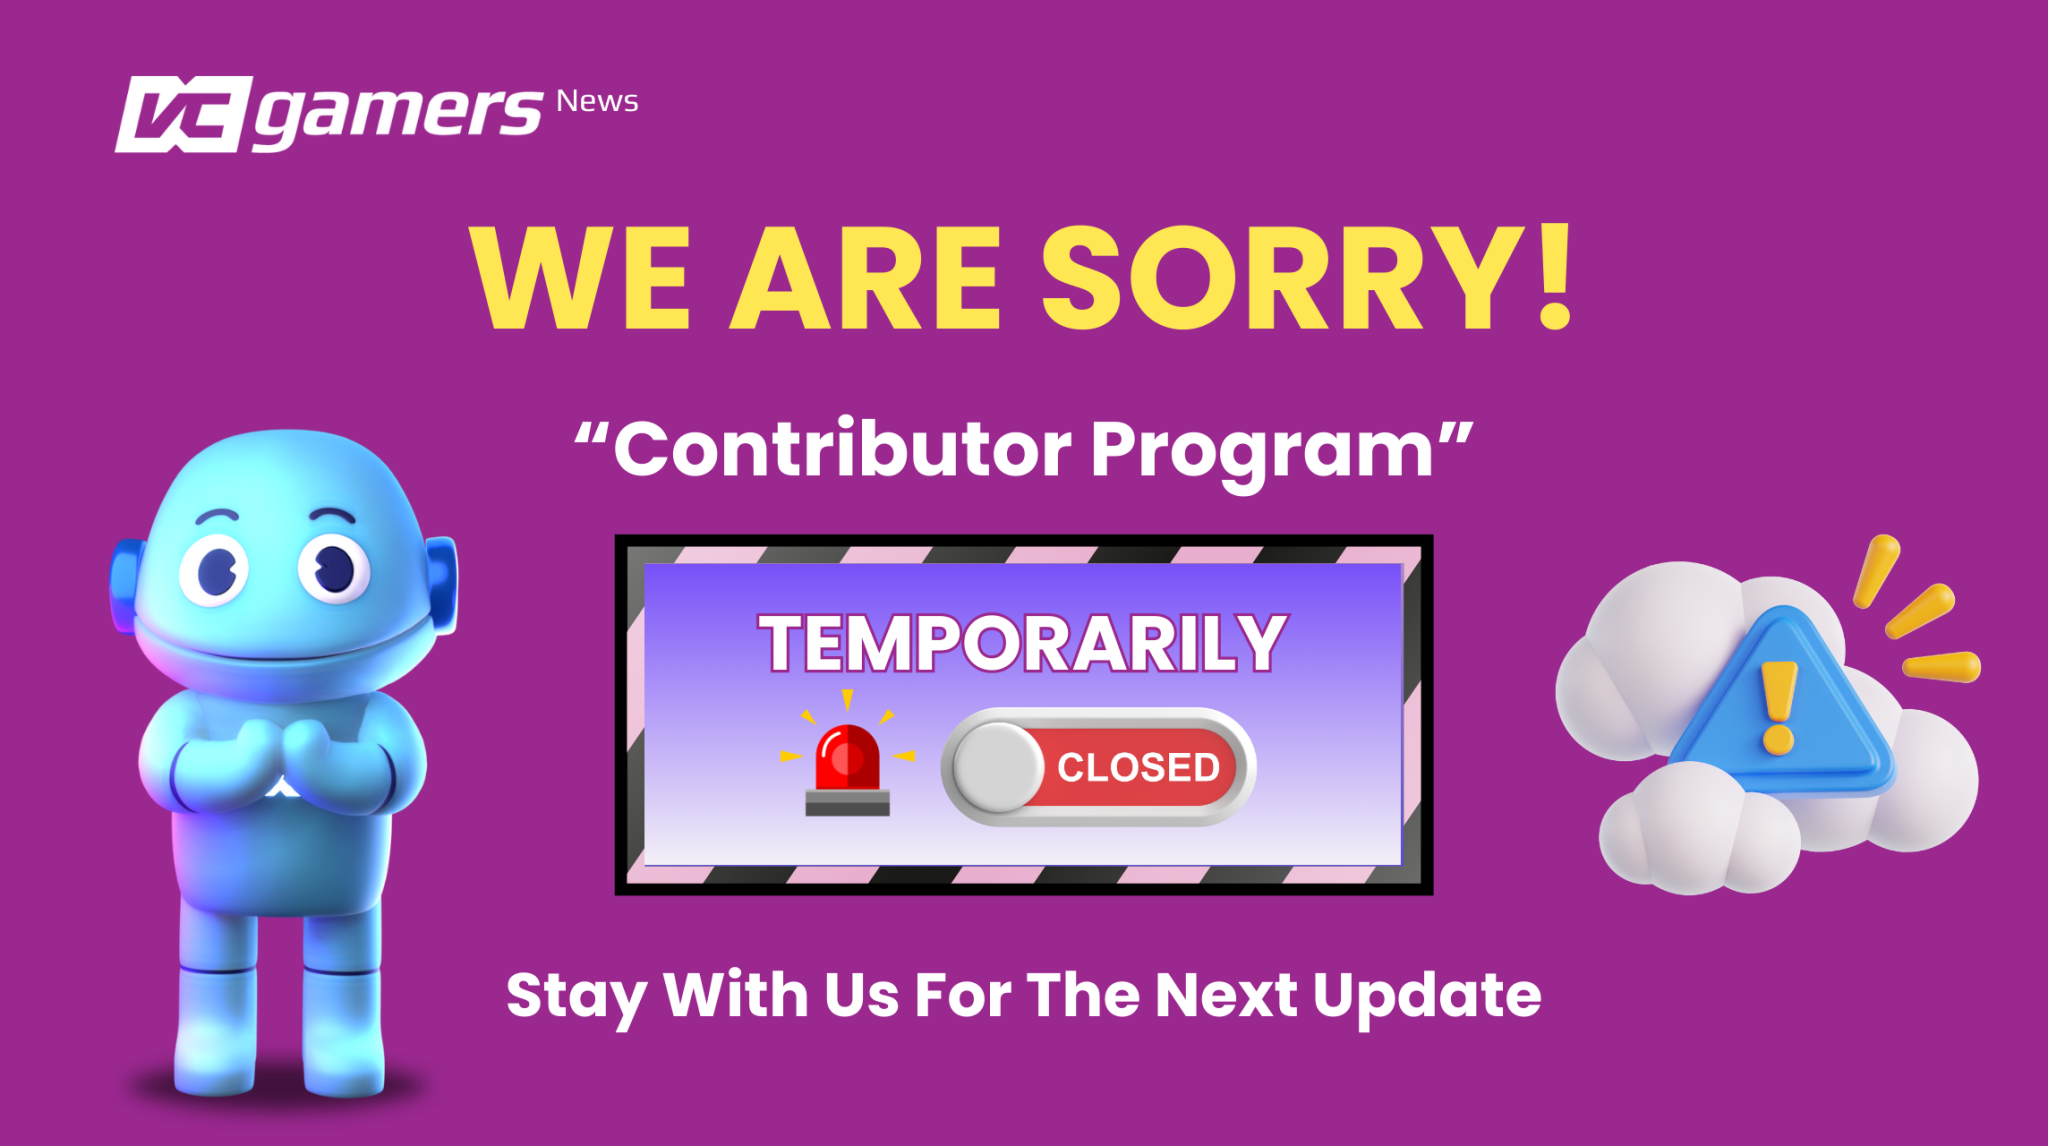 vcgamers news contributor temporarily closed